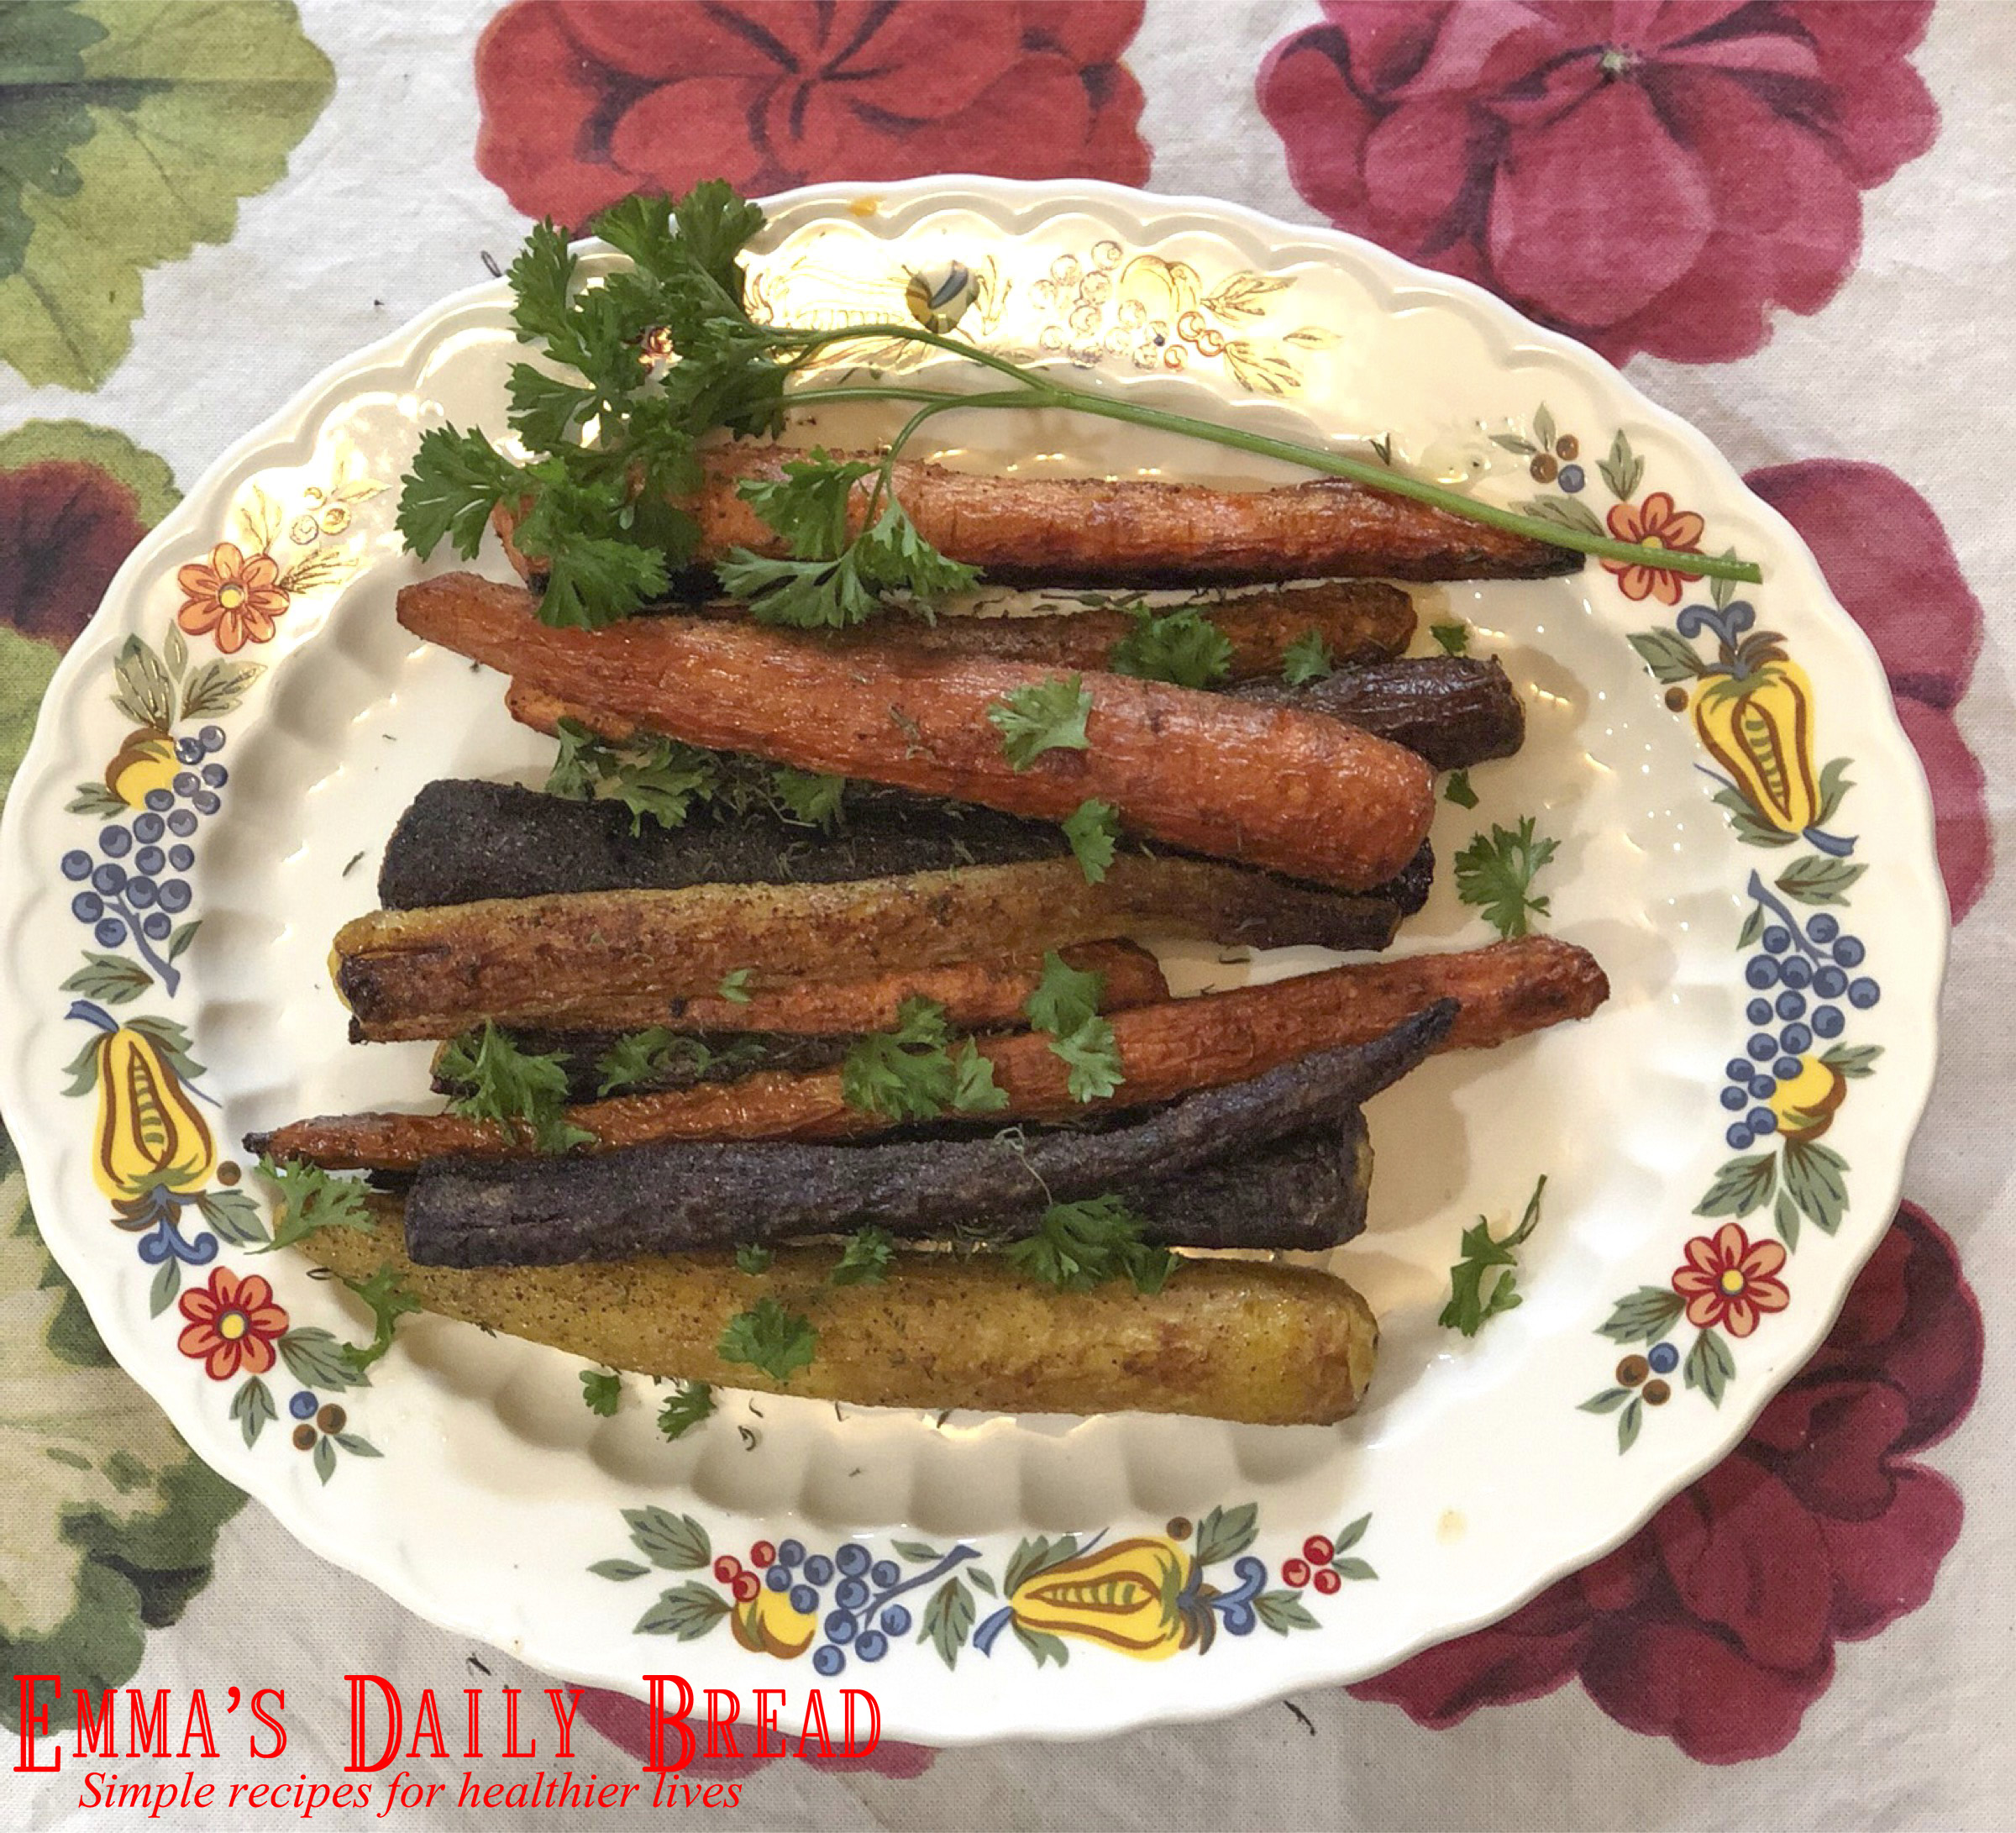 GARLIC ROASTED CARROTS WITH FRESH HERBS